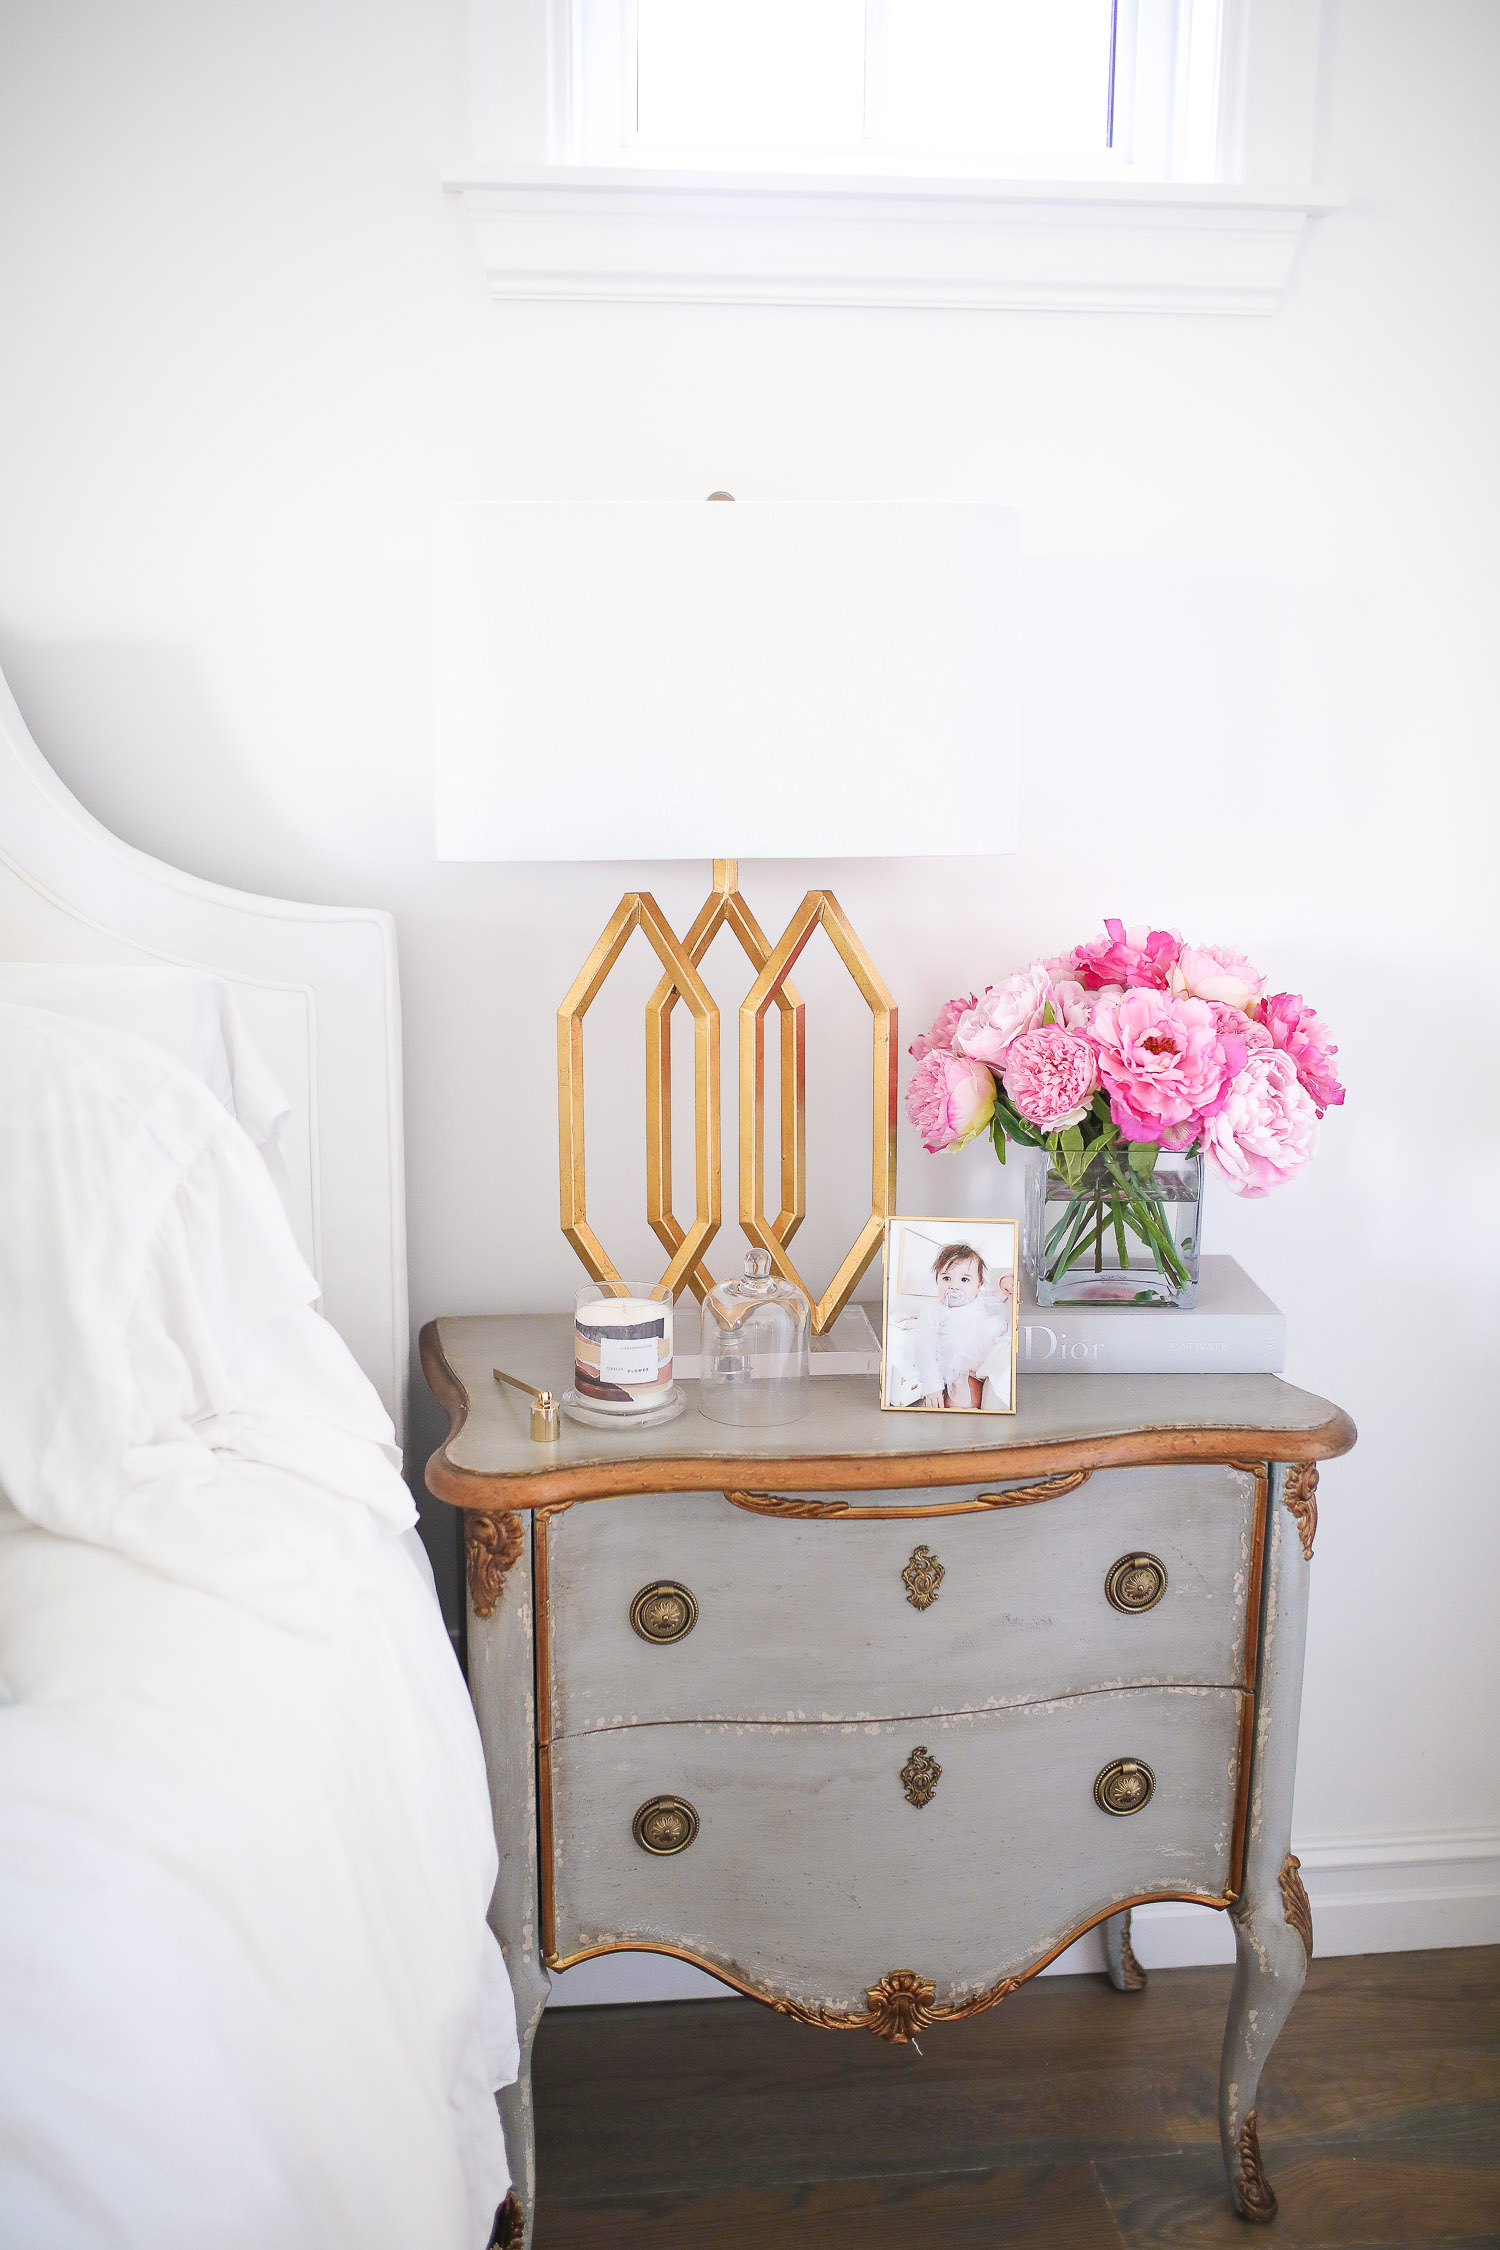 Barefoot dreams blankets, spring gift ideas 2020, commando butter bra reivew, see by chloe wedges, nordstrom must haves spring 2020, emily gemma | Things That Make Me Happy by popular US lifestyle blog, The Sweetest Thing: image of a grey night stand with a gold lamp, gold picture frame, candle, and vase of pink flowers on top. 